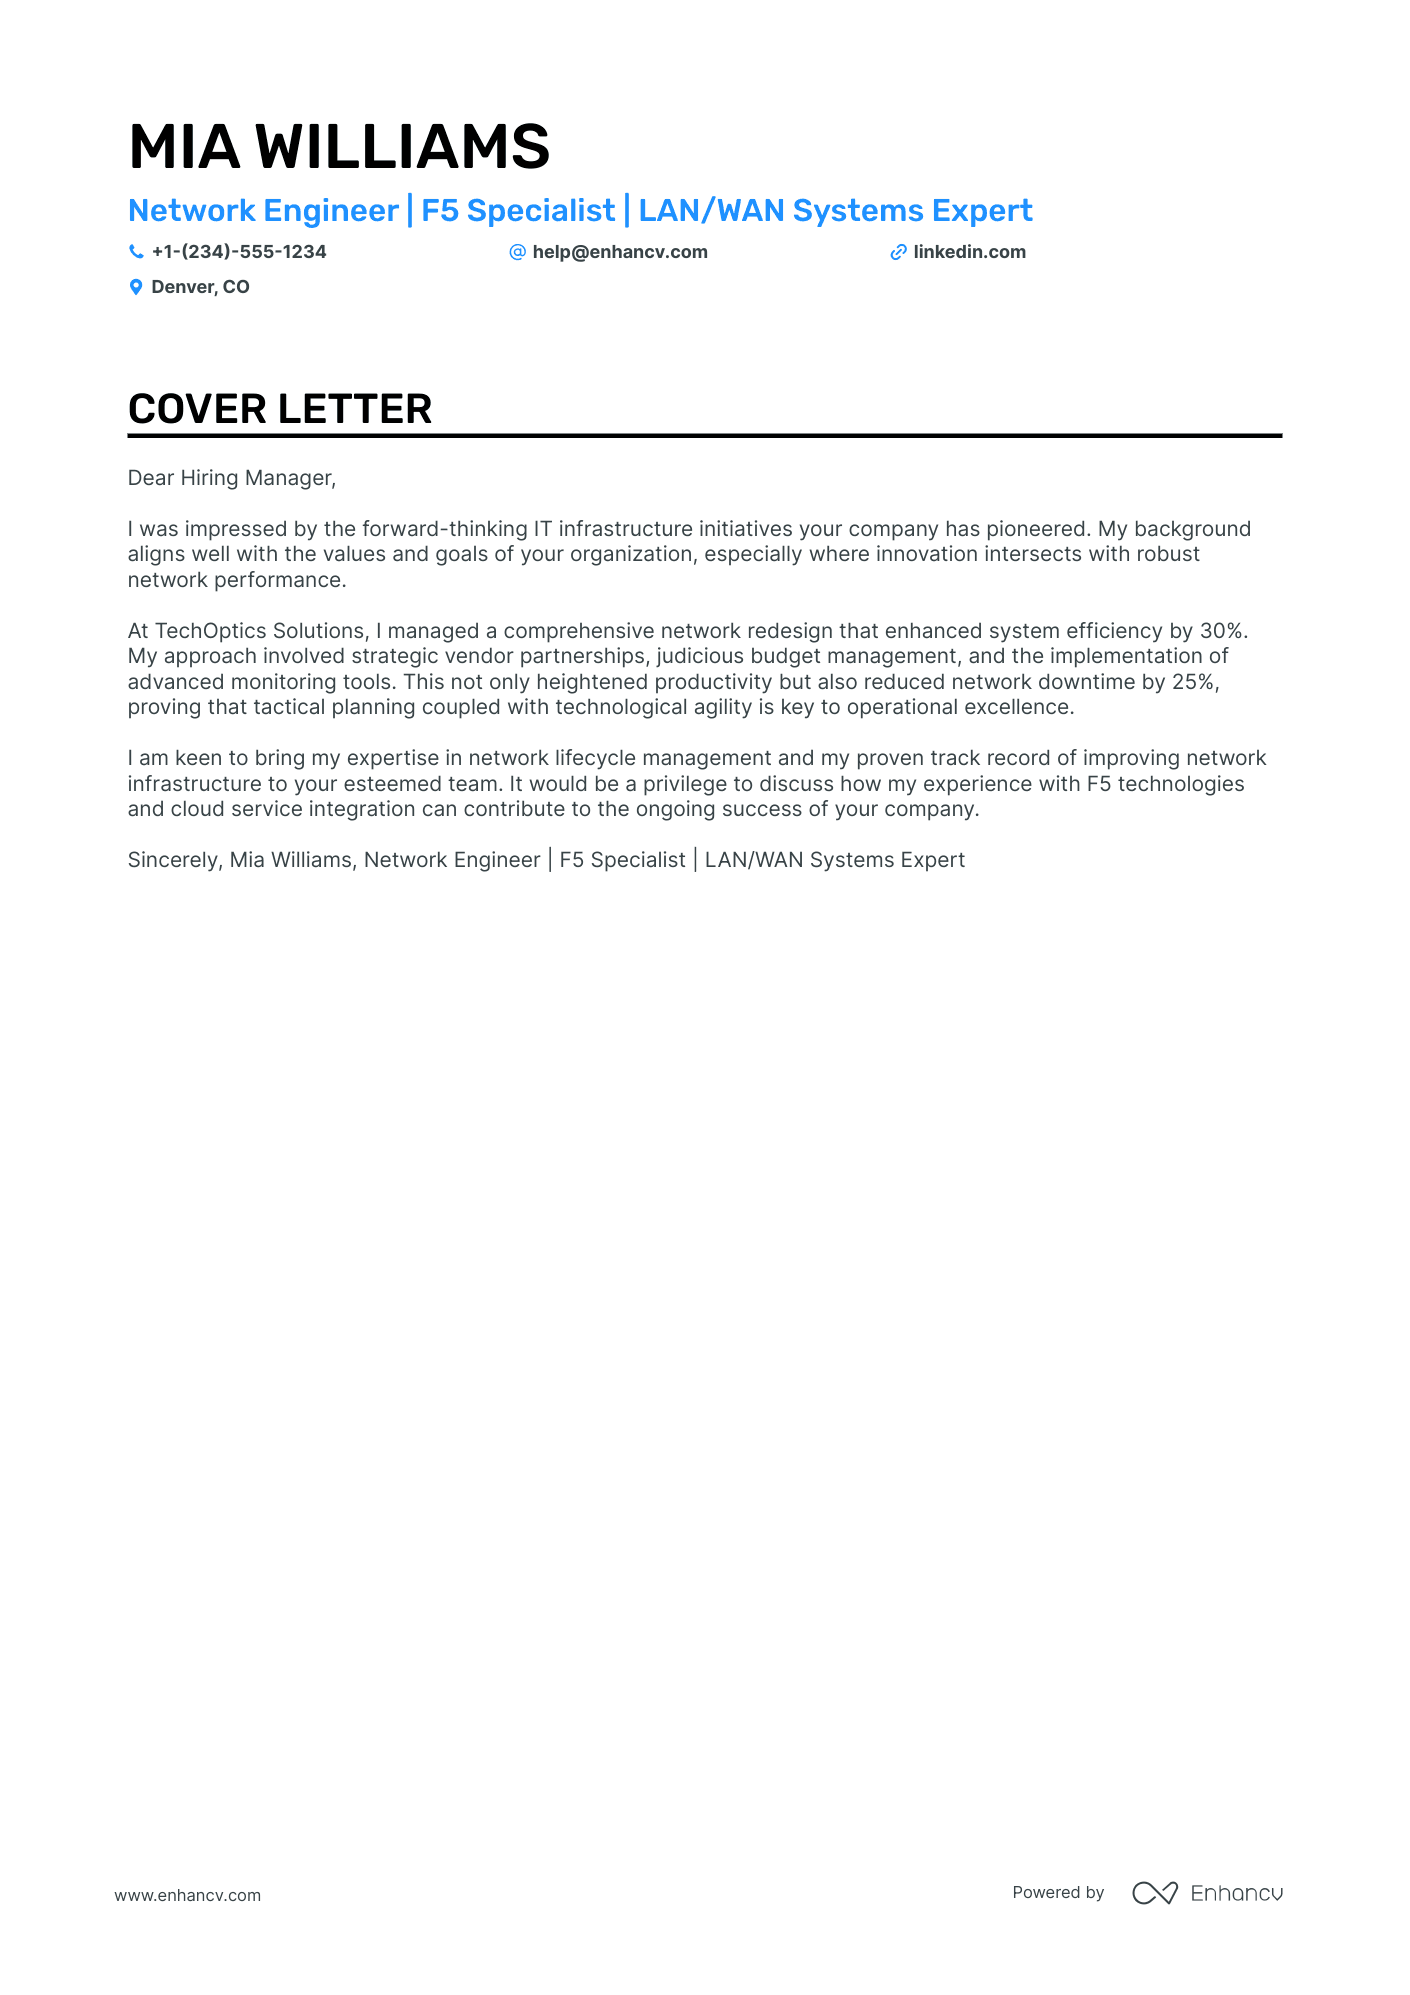 F5 Network Engineer cover letter